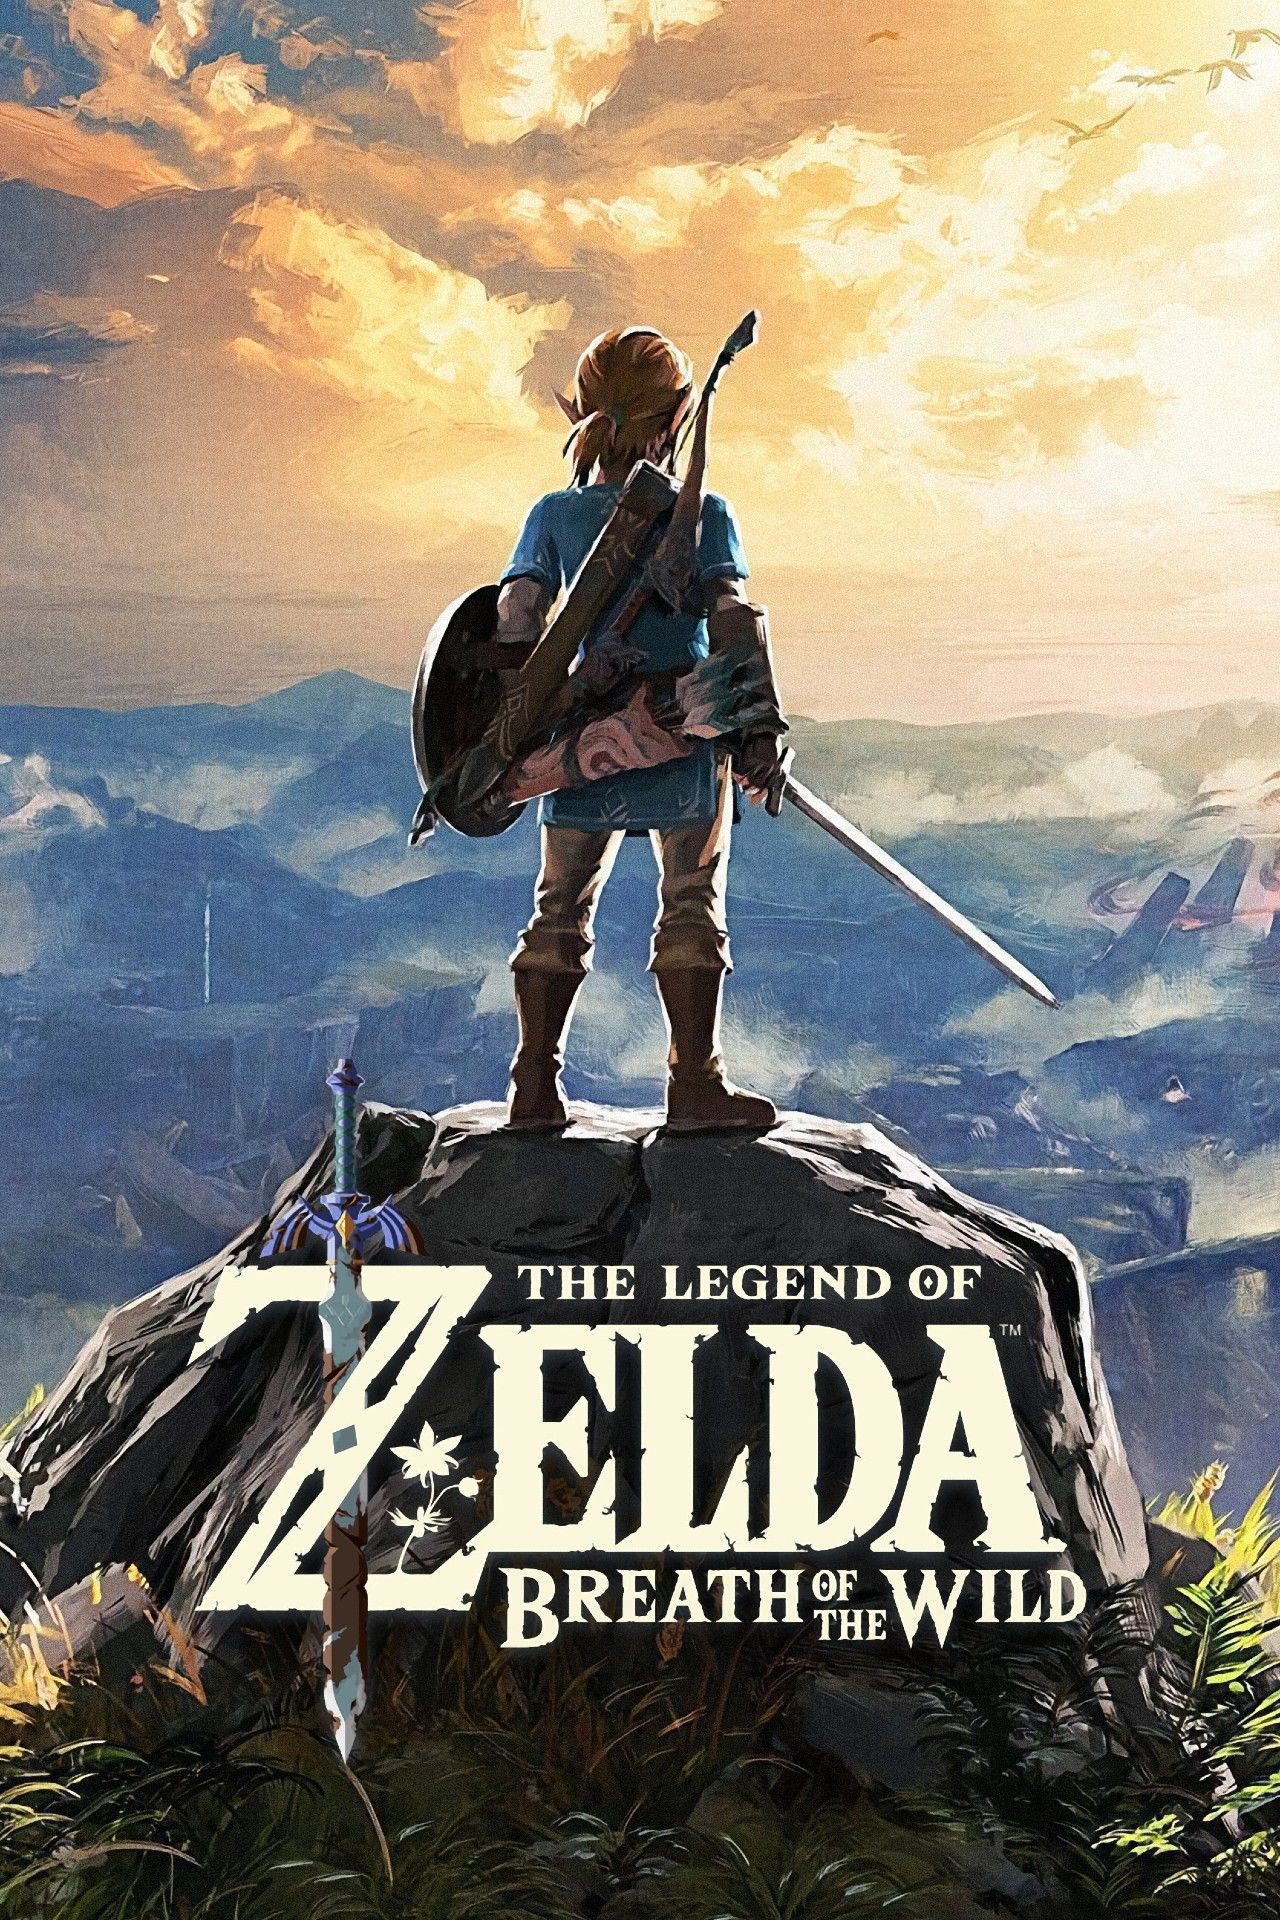 Breath-of-the-Wild-Poster-1